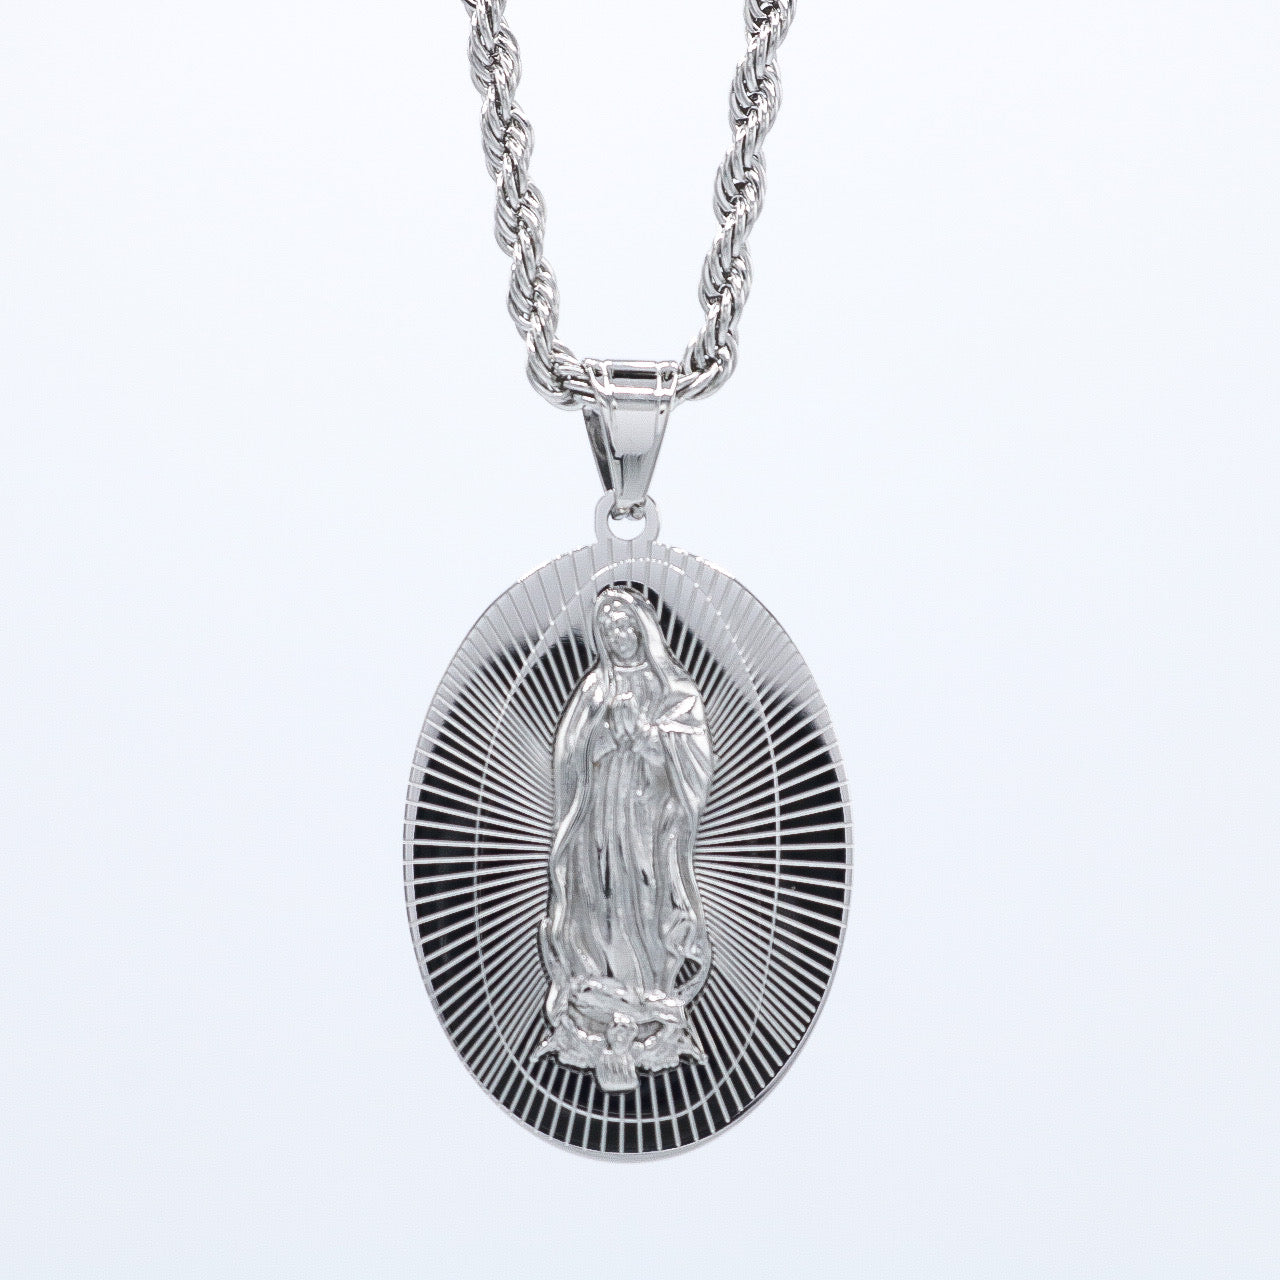 Lady of Guadalupe Medallion Pendant - Premium 316L Stainless